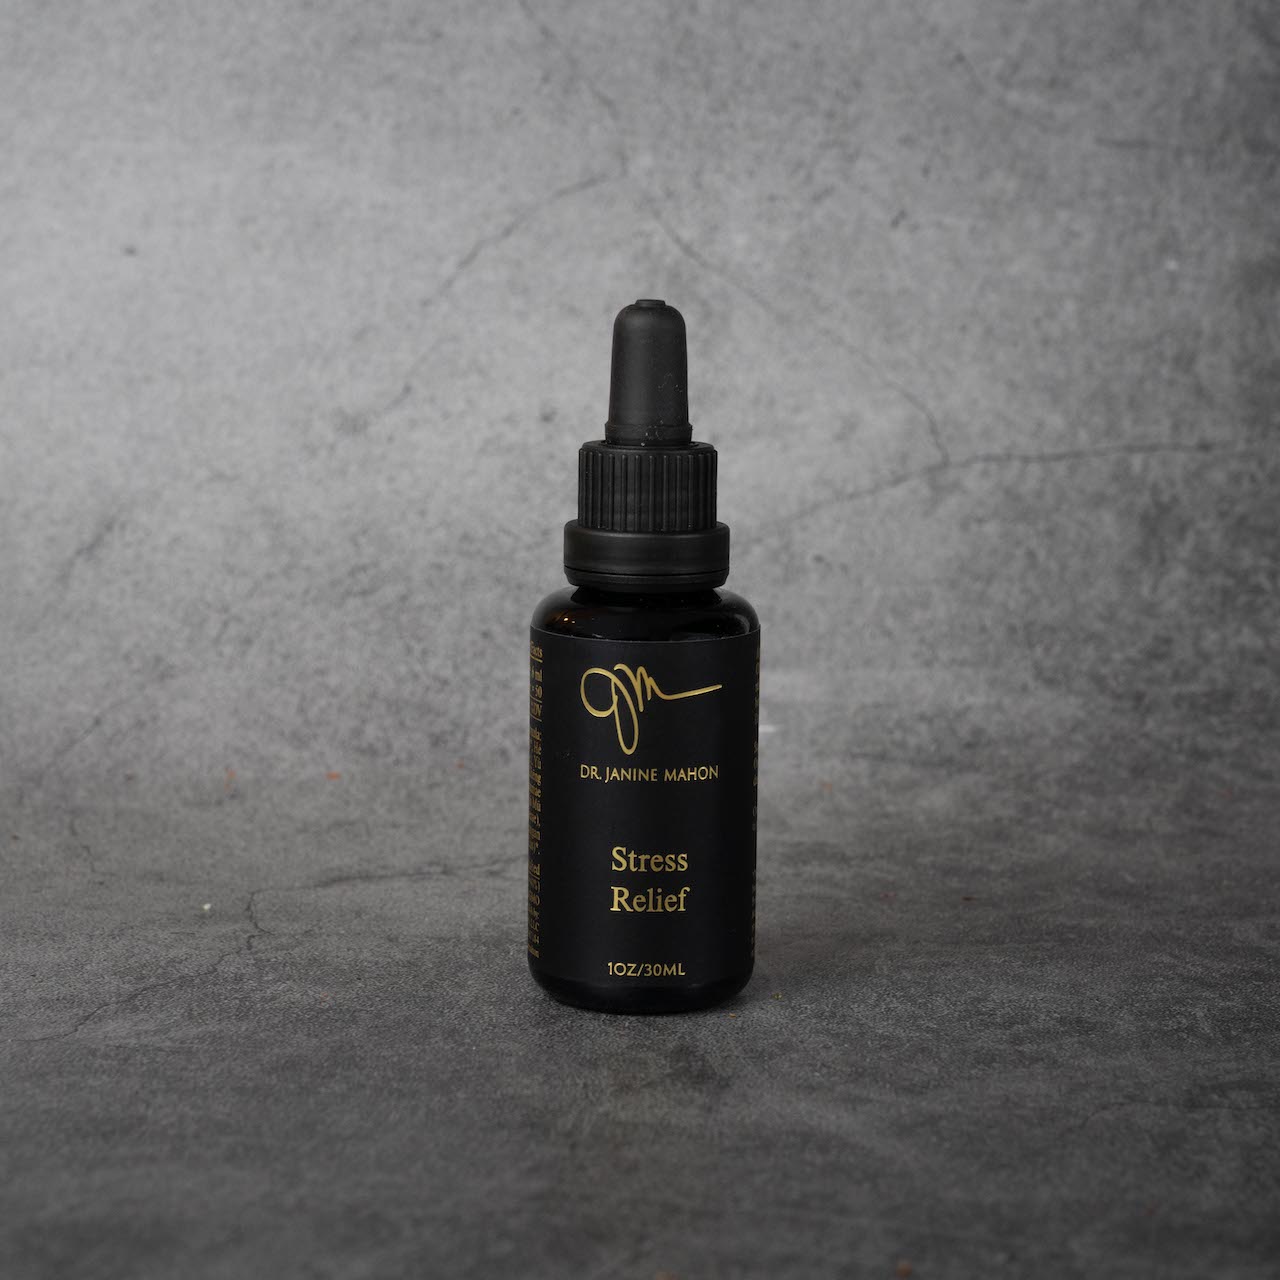 A small black bottle with gold lettering reading "Dr. Janine Mahon" in small print, and "Stress Relief, 1oz/30ml" in slightly larger print. The bottle has a twist-off silicone dropper top.